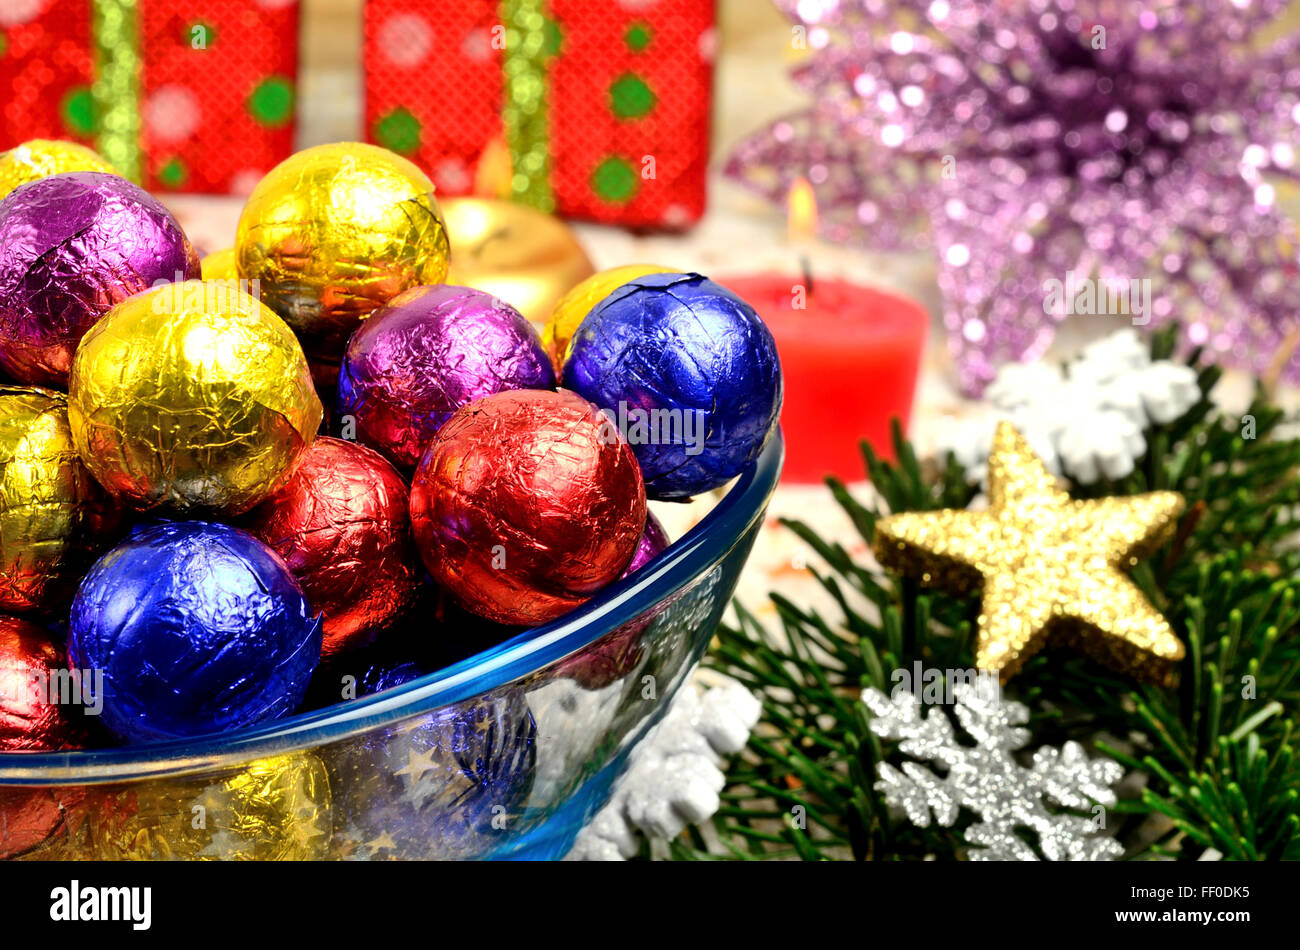 Bowl with colorful chocolate and christmas decoration on table Stock Photo